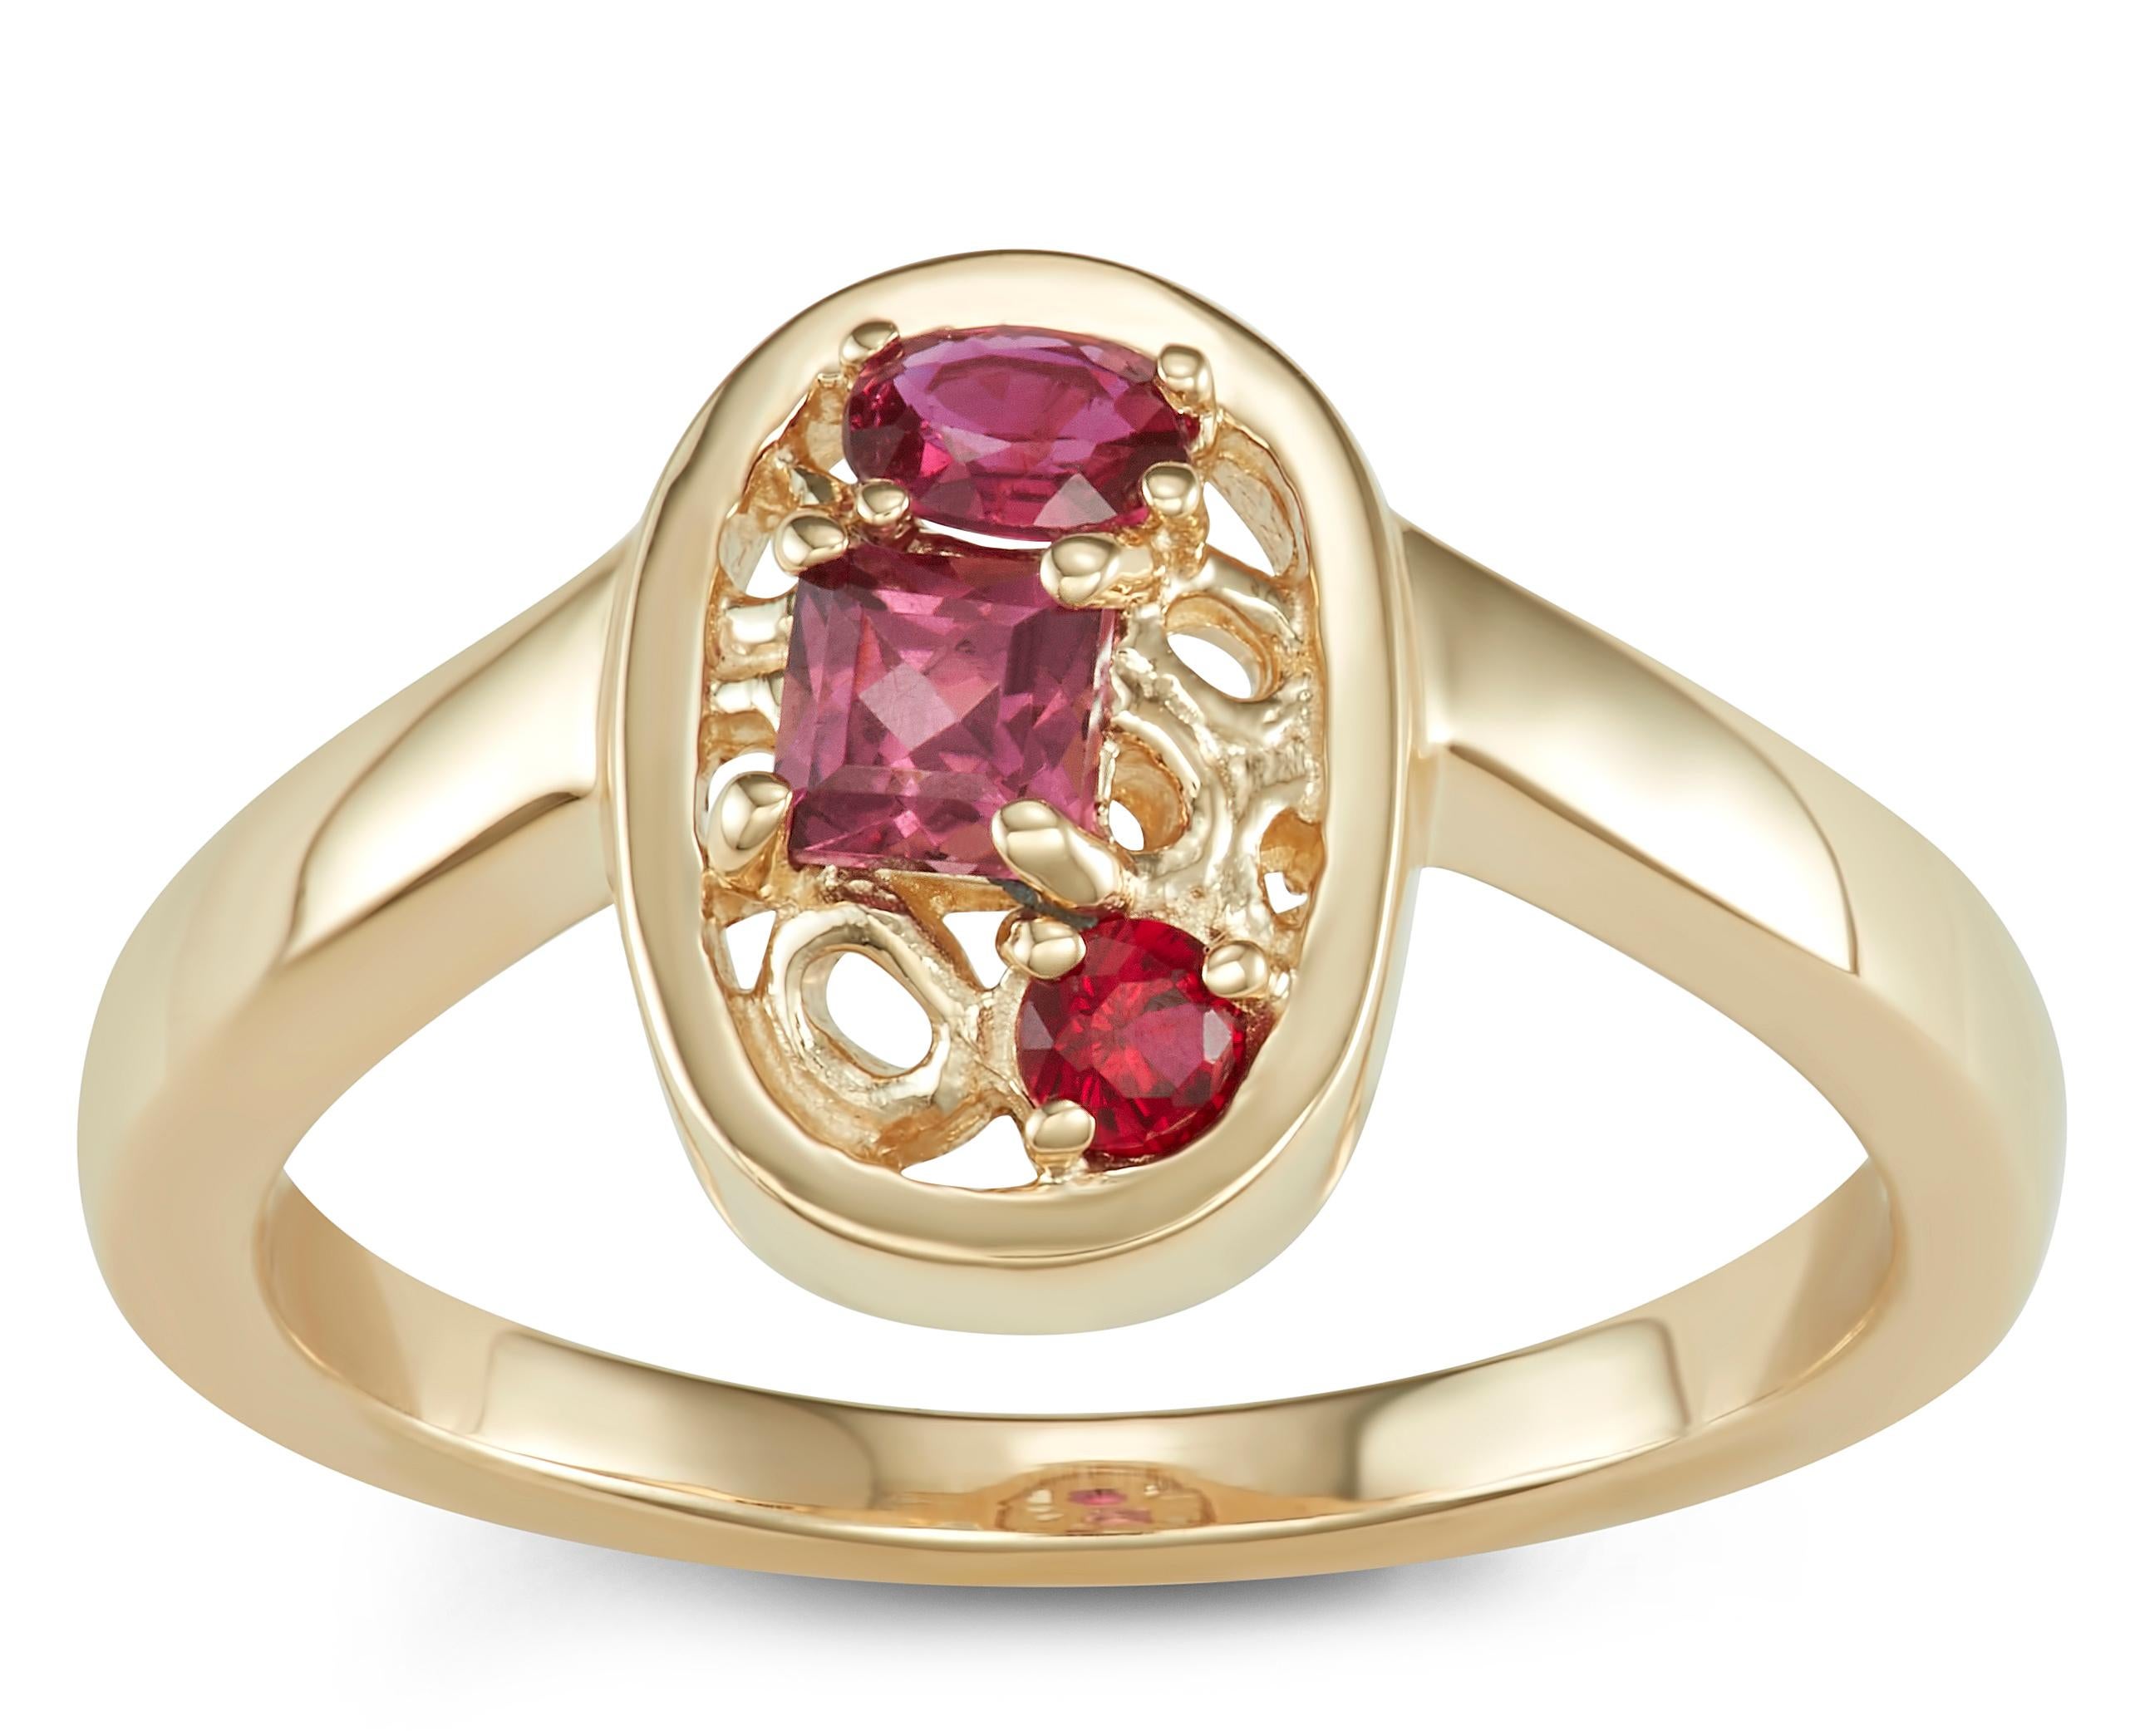 Contemporary 14 Karat Yellow Gold with Ruby and Rhodolite Stones Cluster Ring